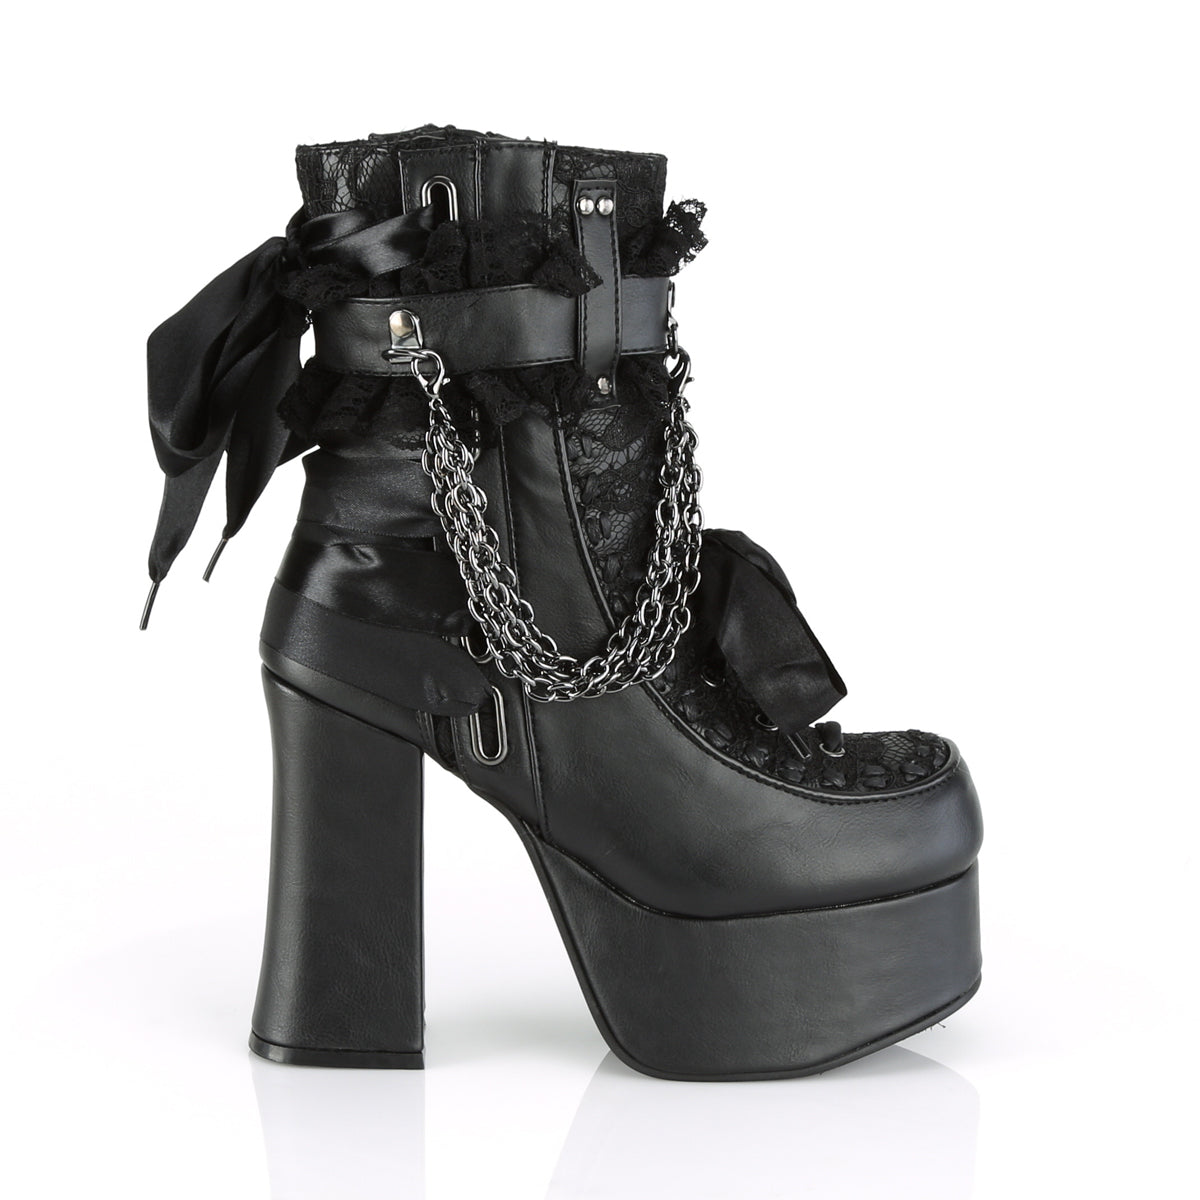 DemoniaCult Womens Ankle Boots CHARADE-110 Blk Vegan Leather-Lace Overlay